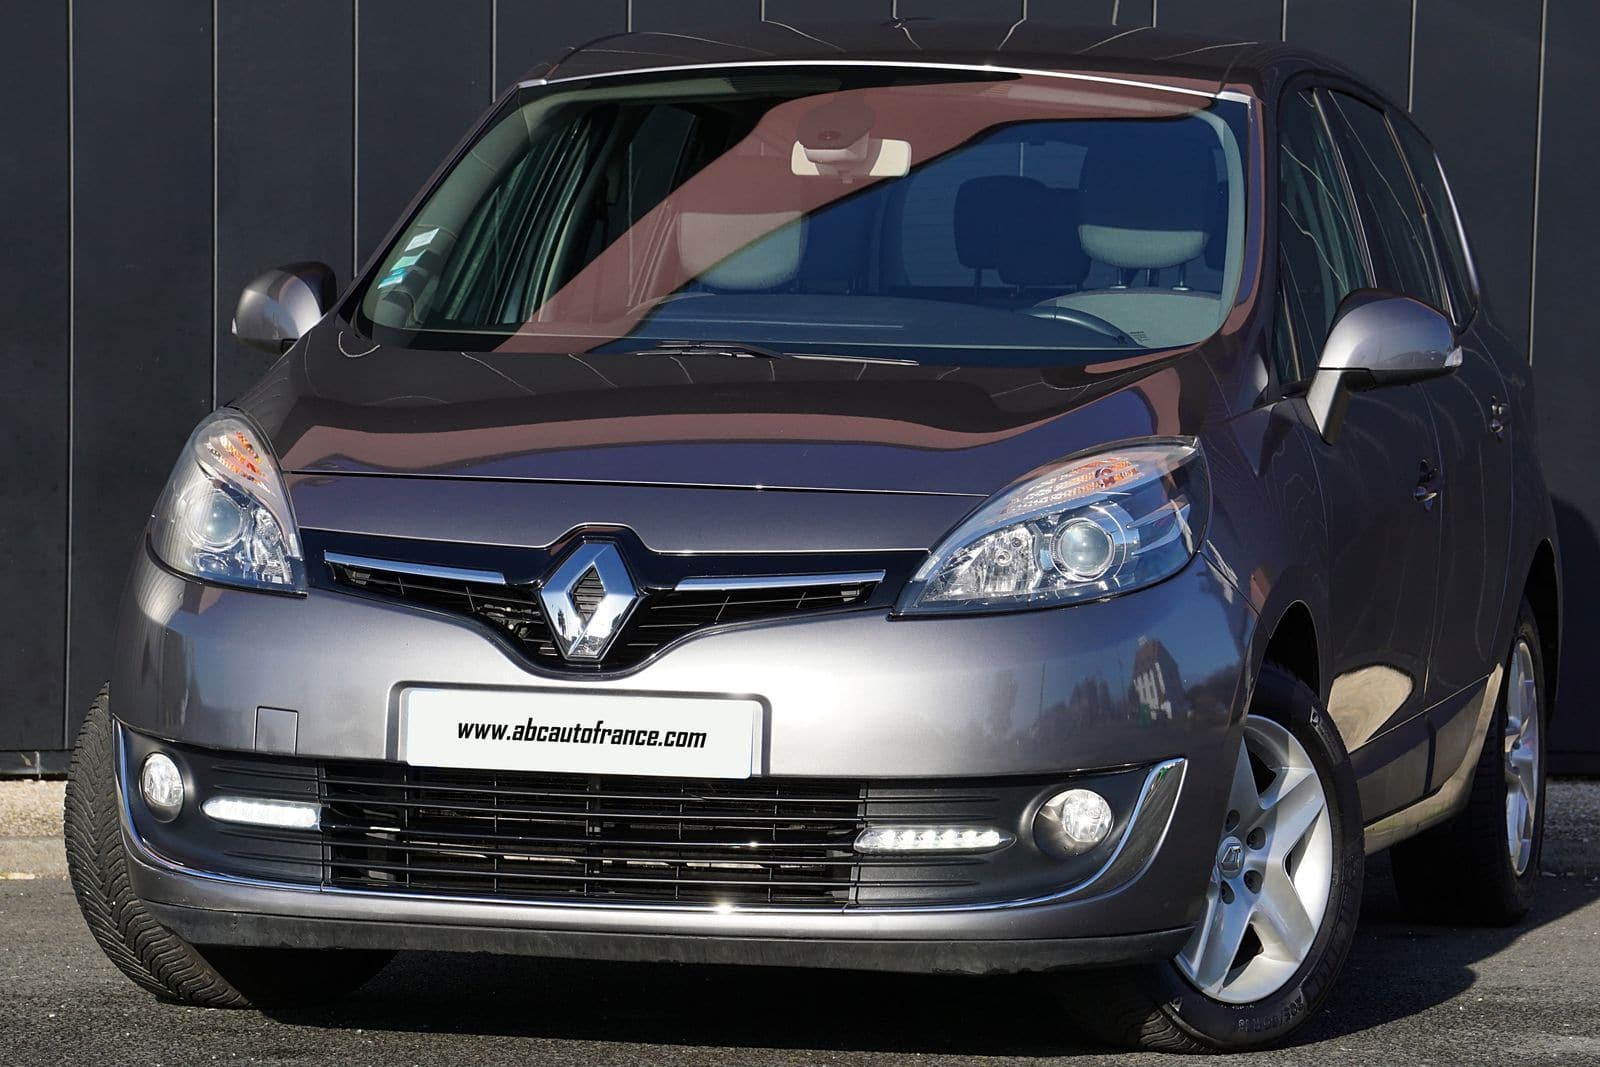 RENAULT Grand Scenic III (Gd scenic 3) 1.5 dCi 110 Cv energy Business eco² 7 places Occasion 79 abcautofrance (abc auto france) 1